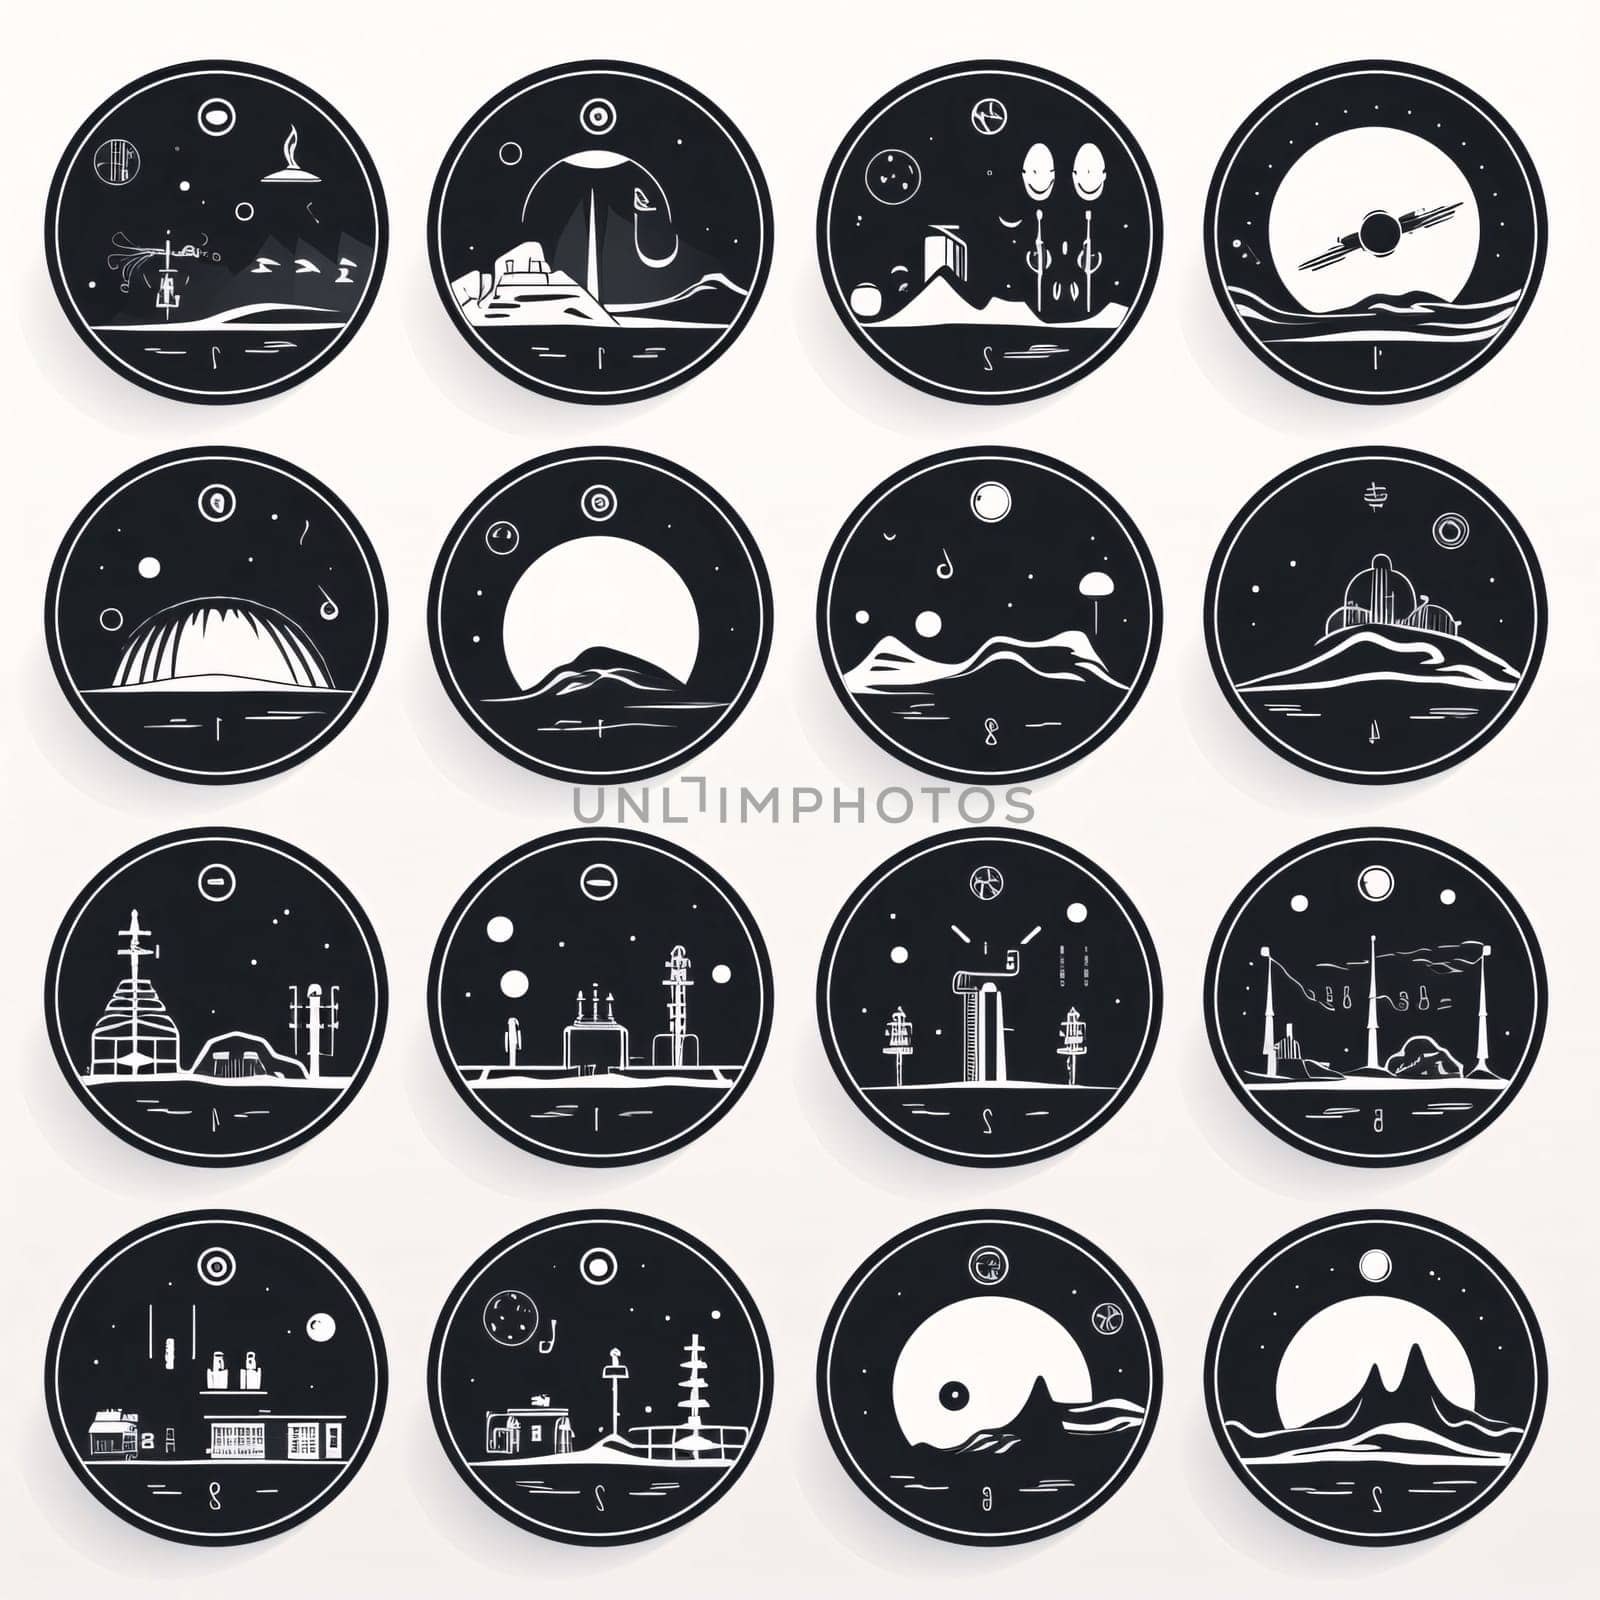 New icons collection: Set of travel, tourism and journey icons in a circle. Vector illustration